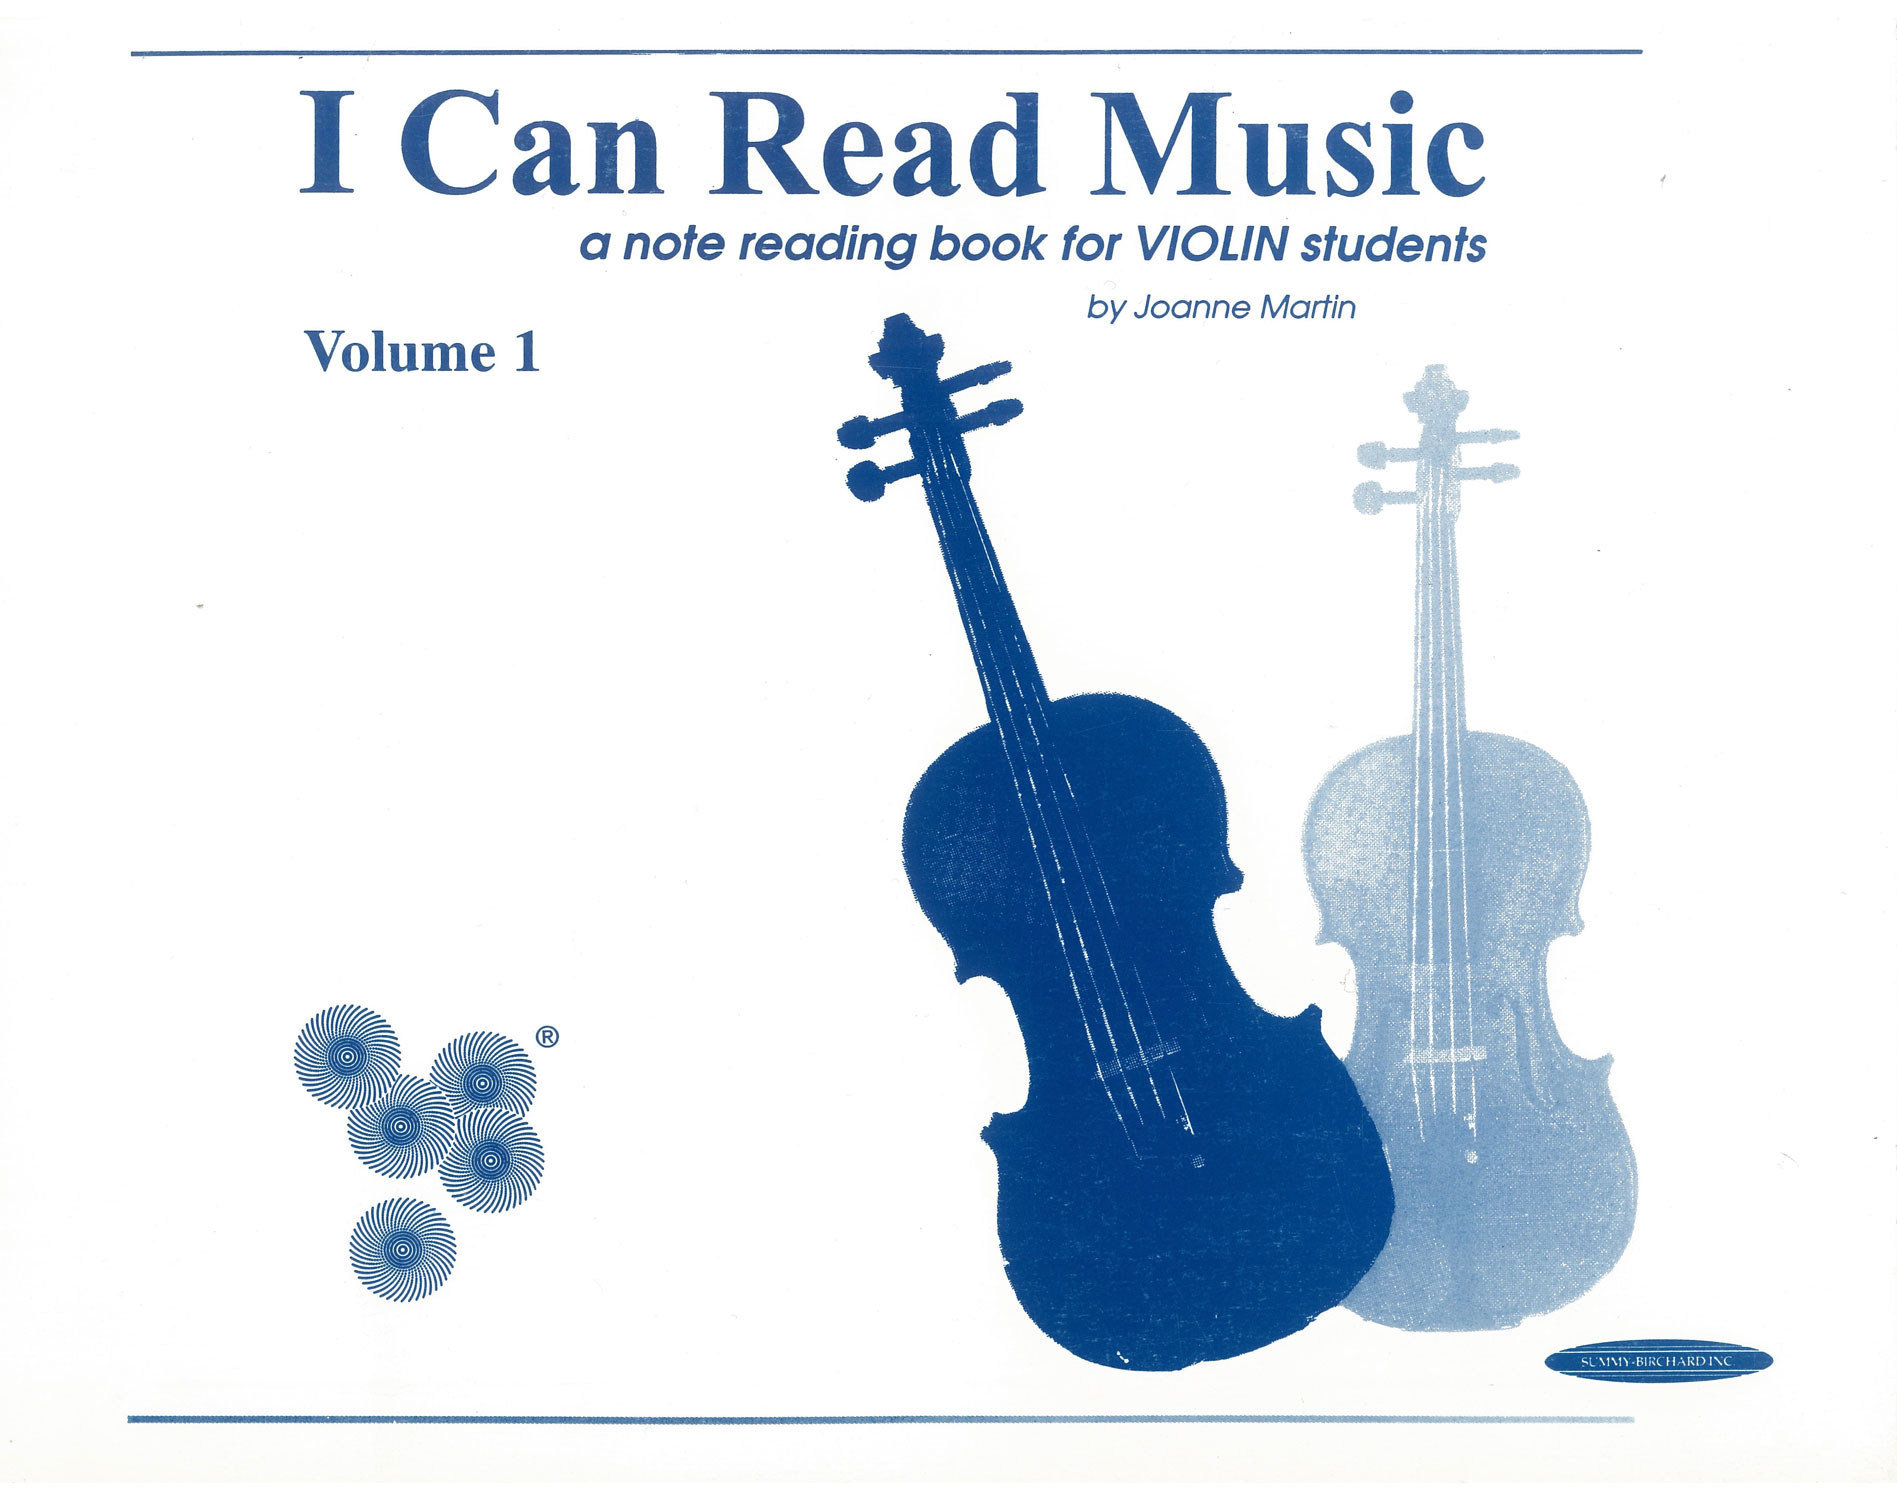 I Can Read Music for Violin